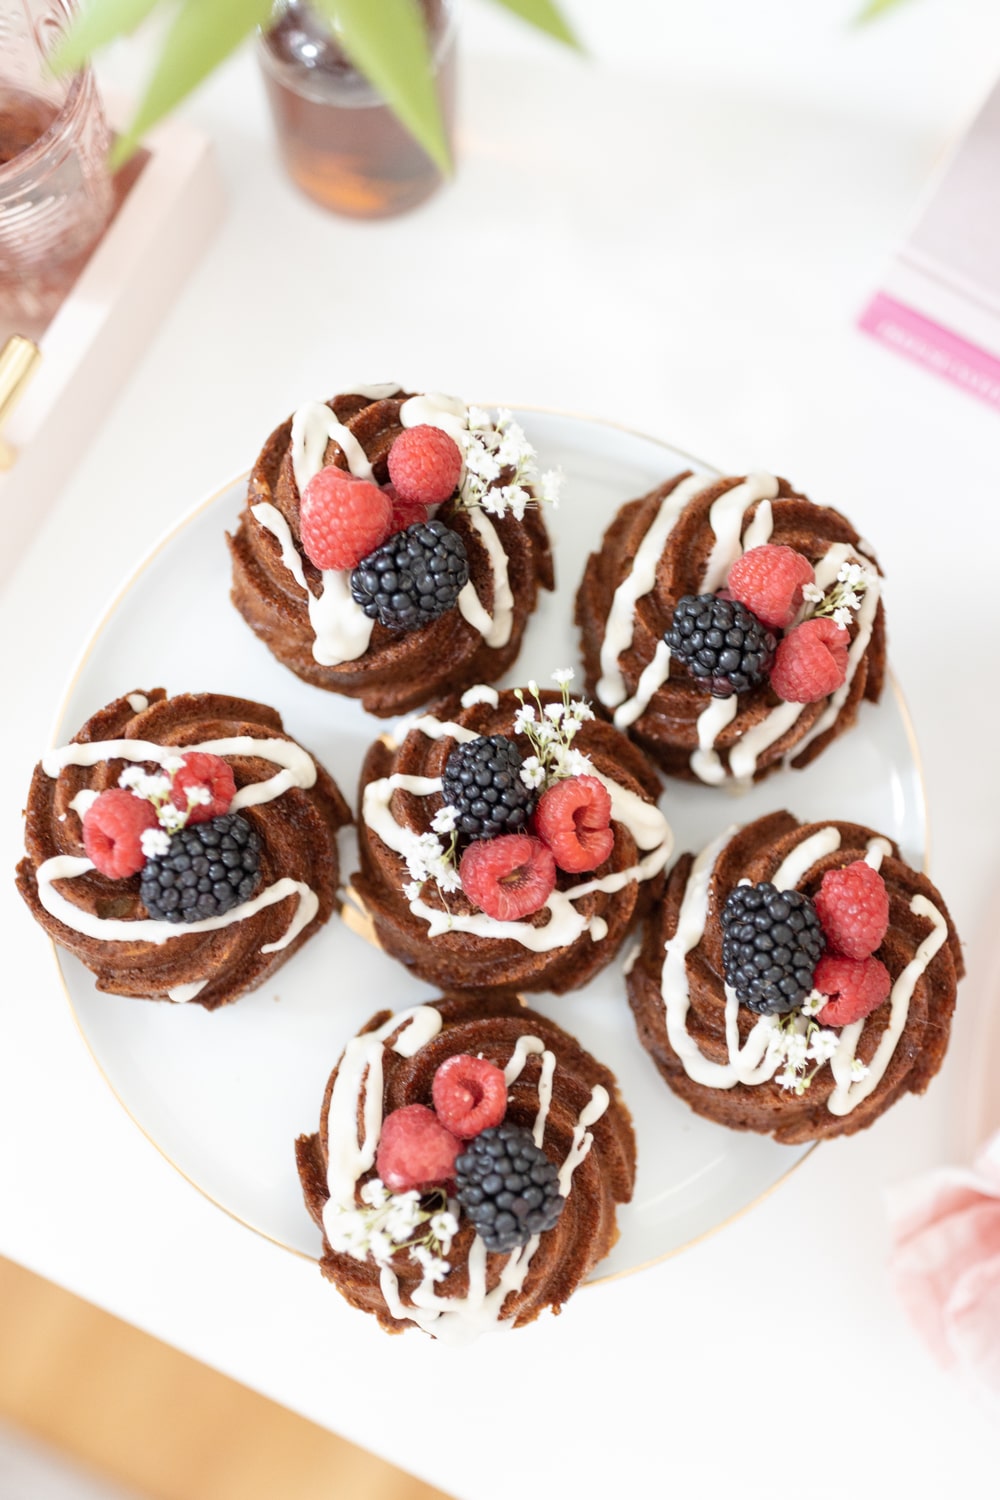 Mini coffee bundt cakes created for Galentine's Day brunch by blogger Stephanie Ziajka on Diary of a Debutante